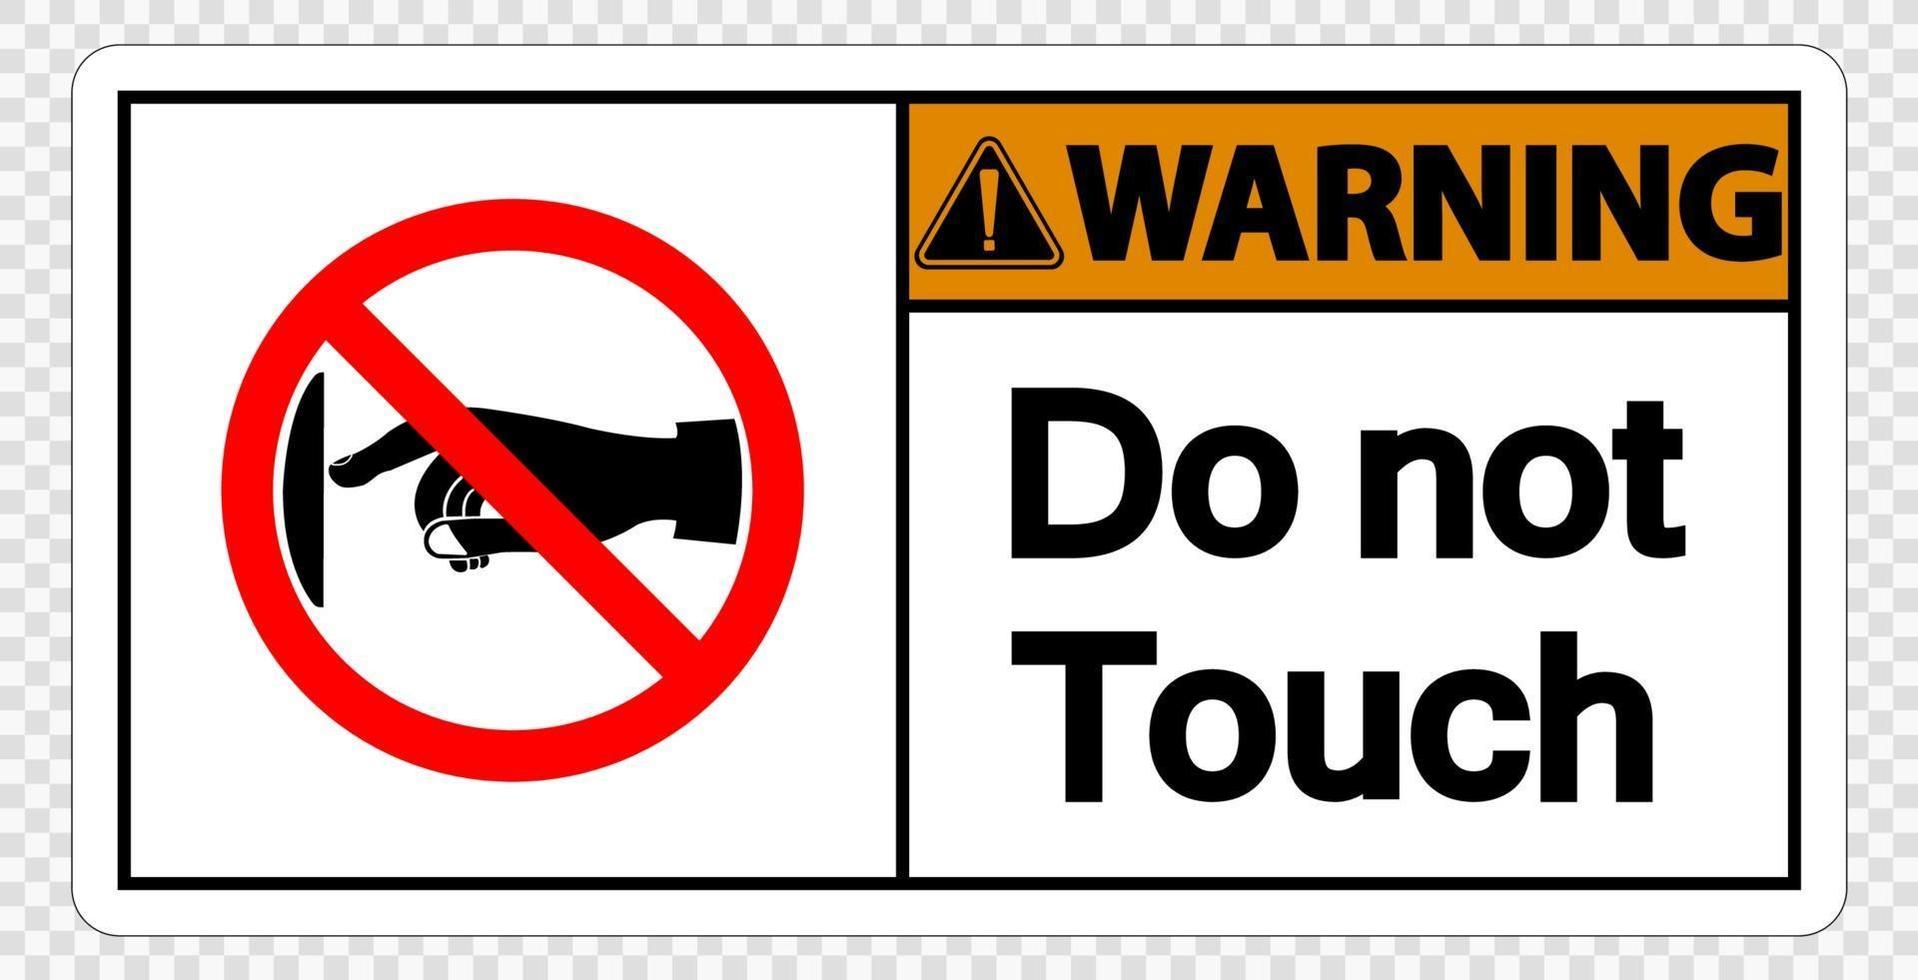 warning-do-not-touch-sign-label-on-transparent-background-2315765